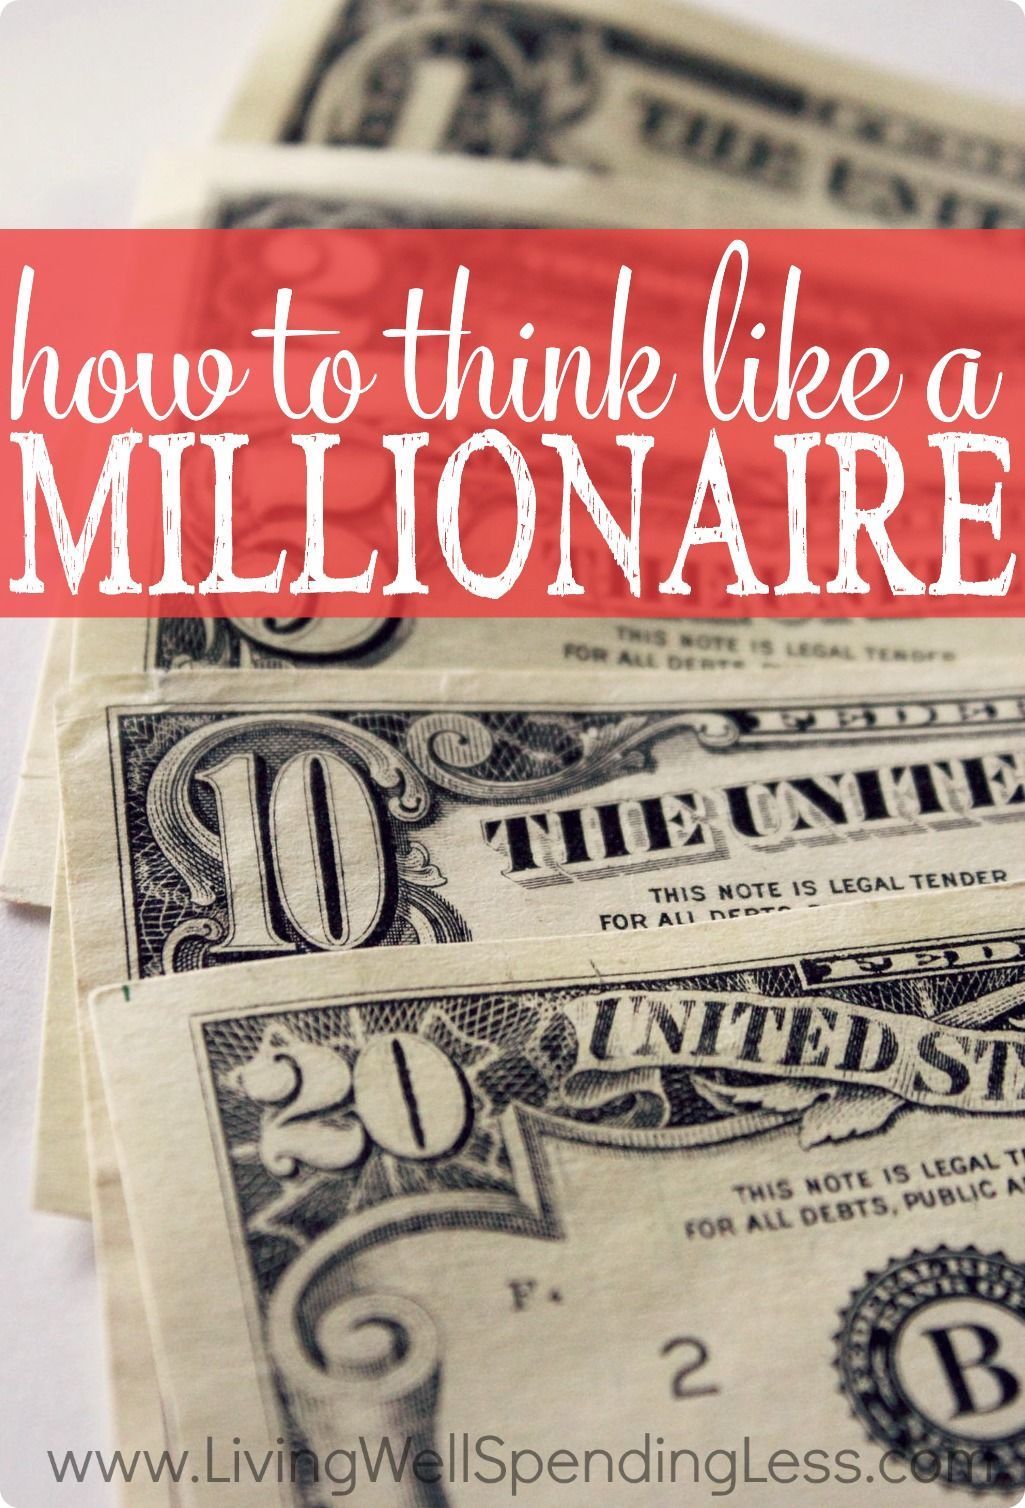 Ever wondered what sets millionaires apart from the rest of us?  Surprisingly, it’s not fancy cars, private jets, or big houses,